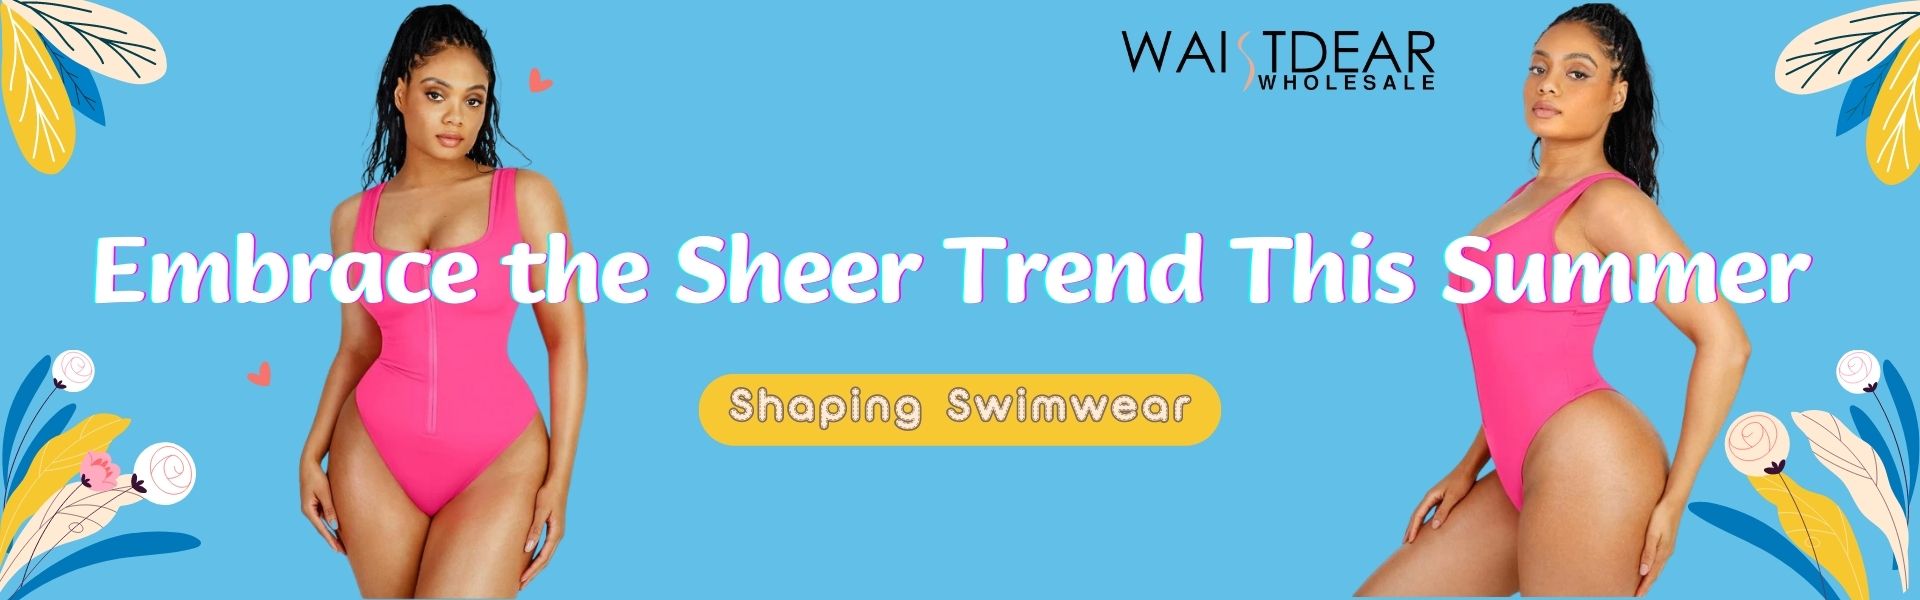 Embrace the Sheer Trend This Summer——Shaping Swimwear